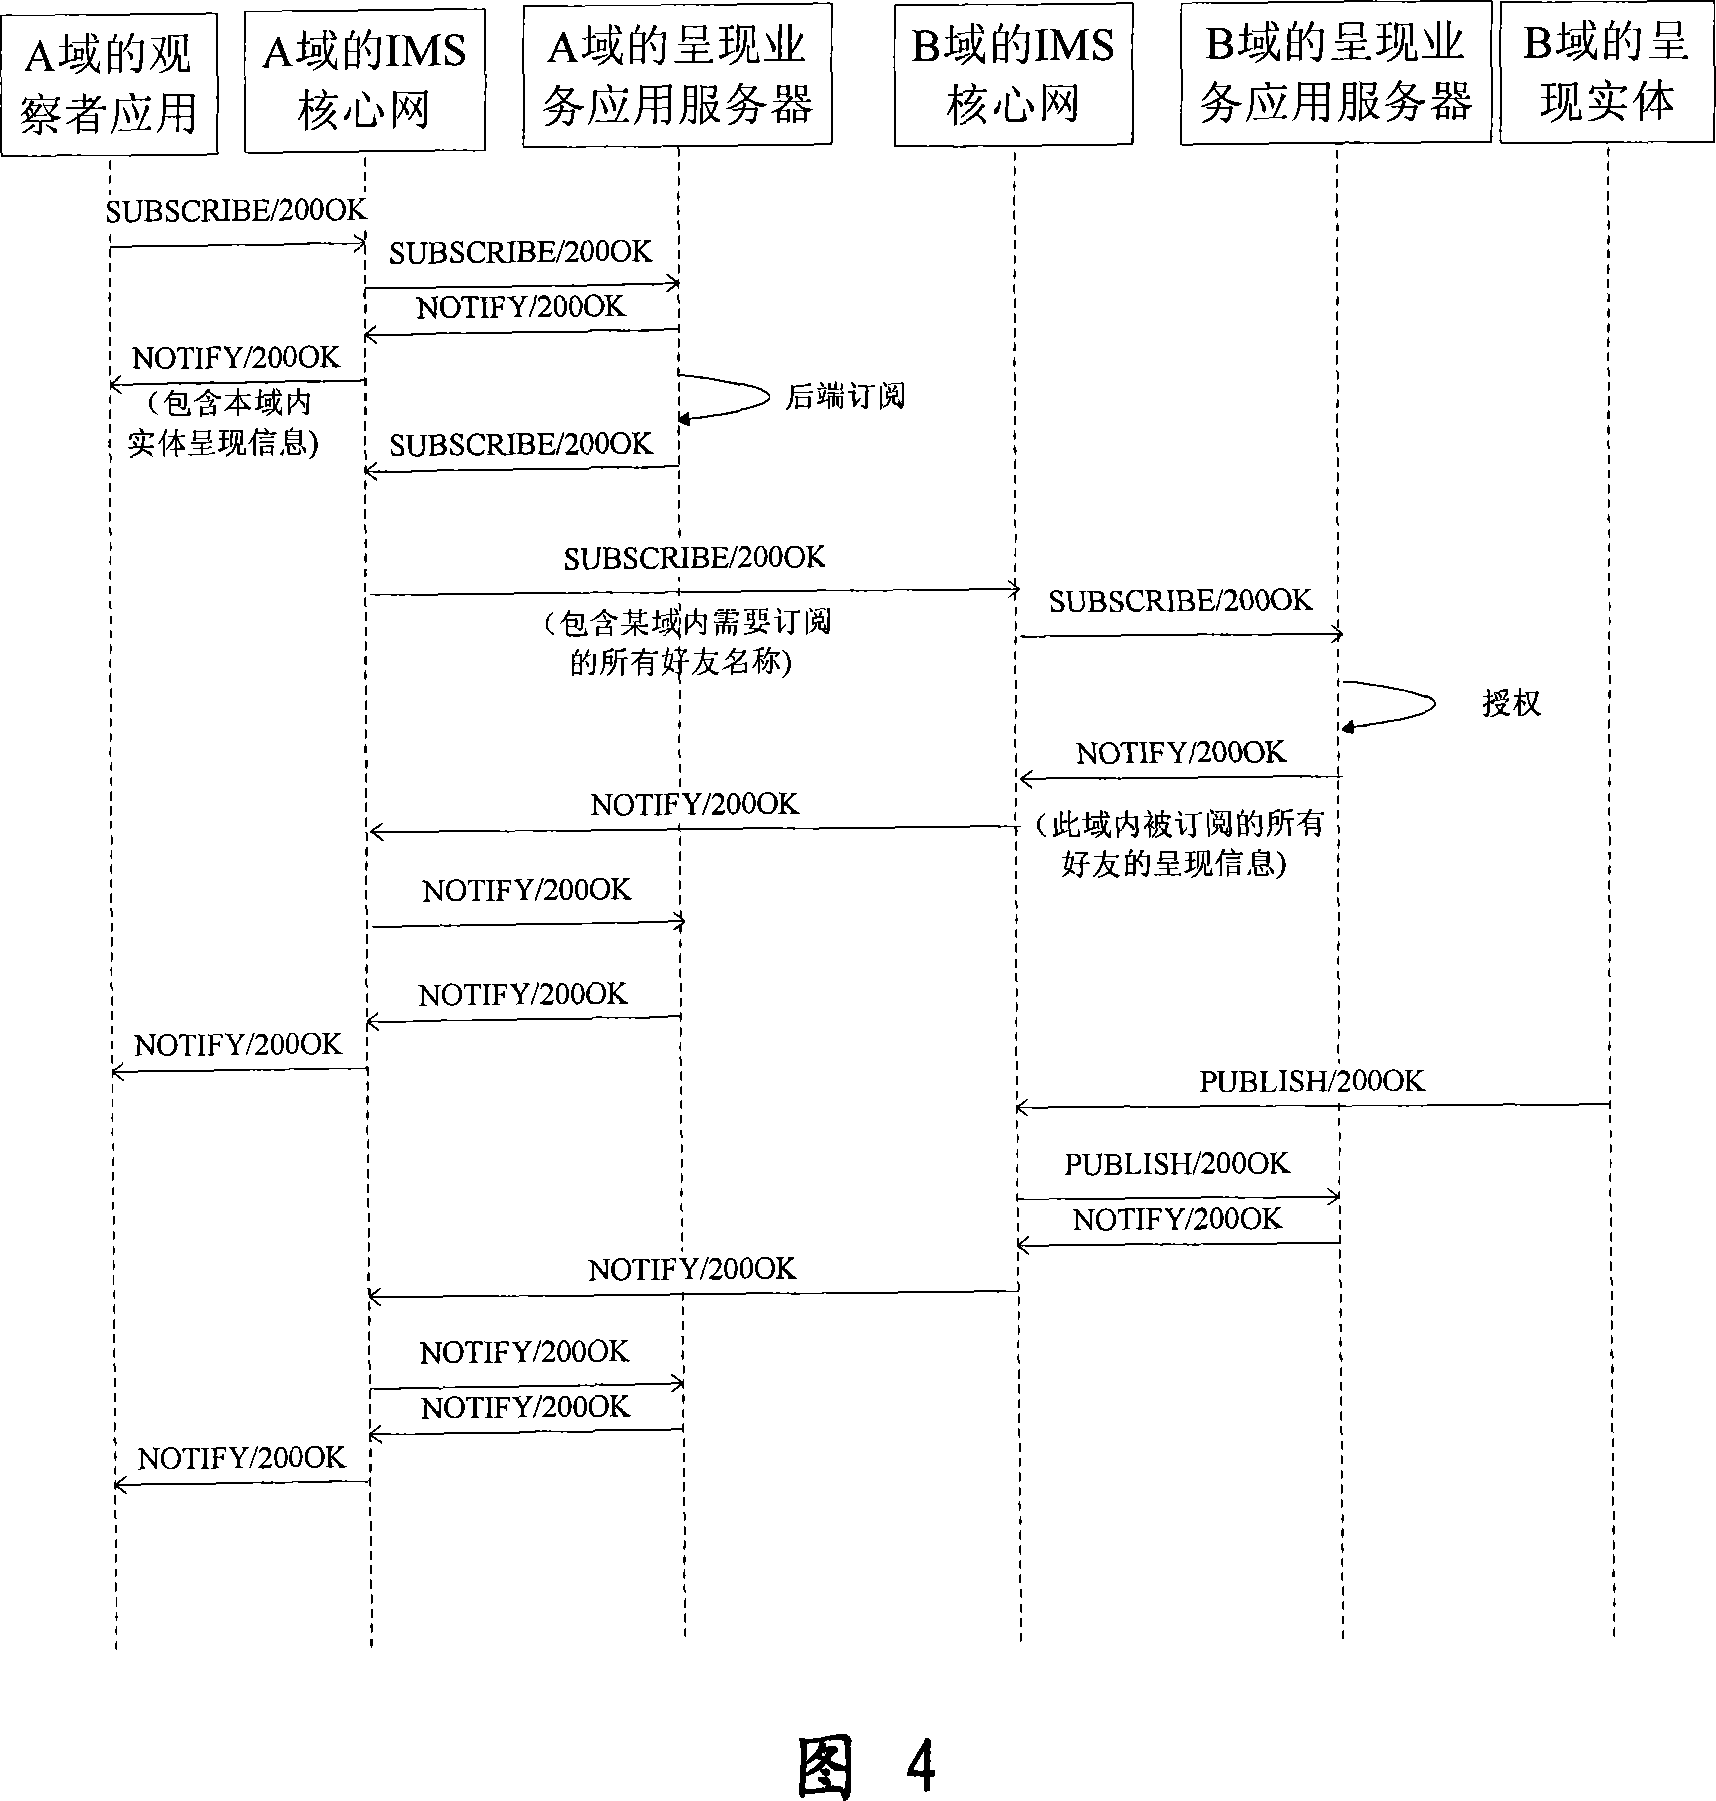 A network system and method for displaying service based on IMS